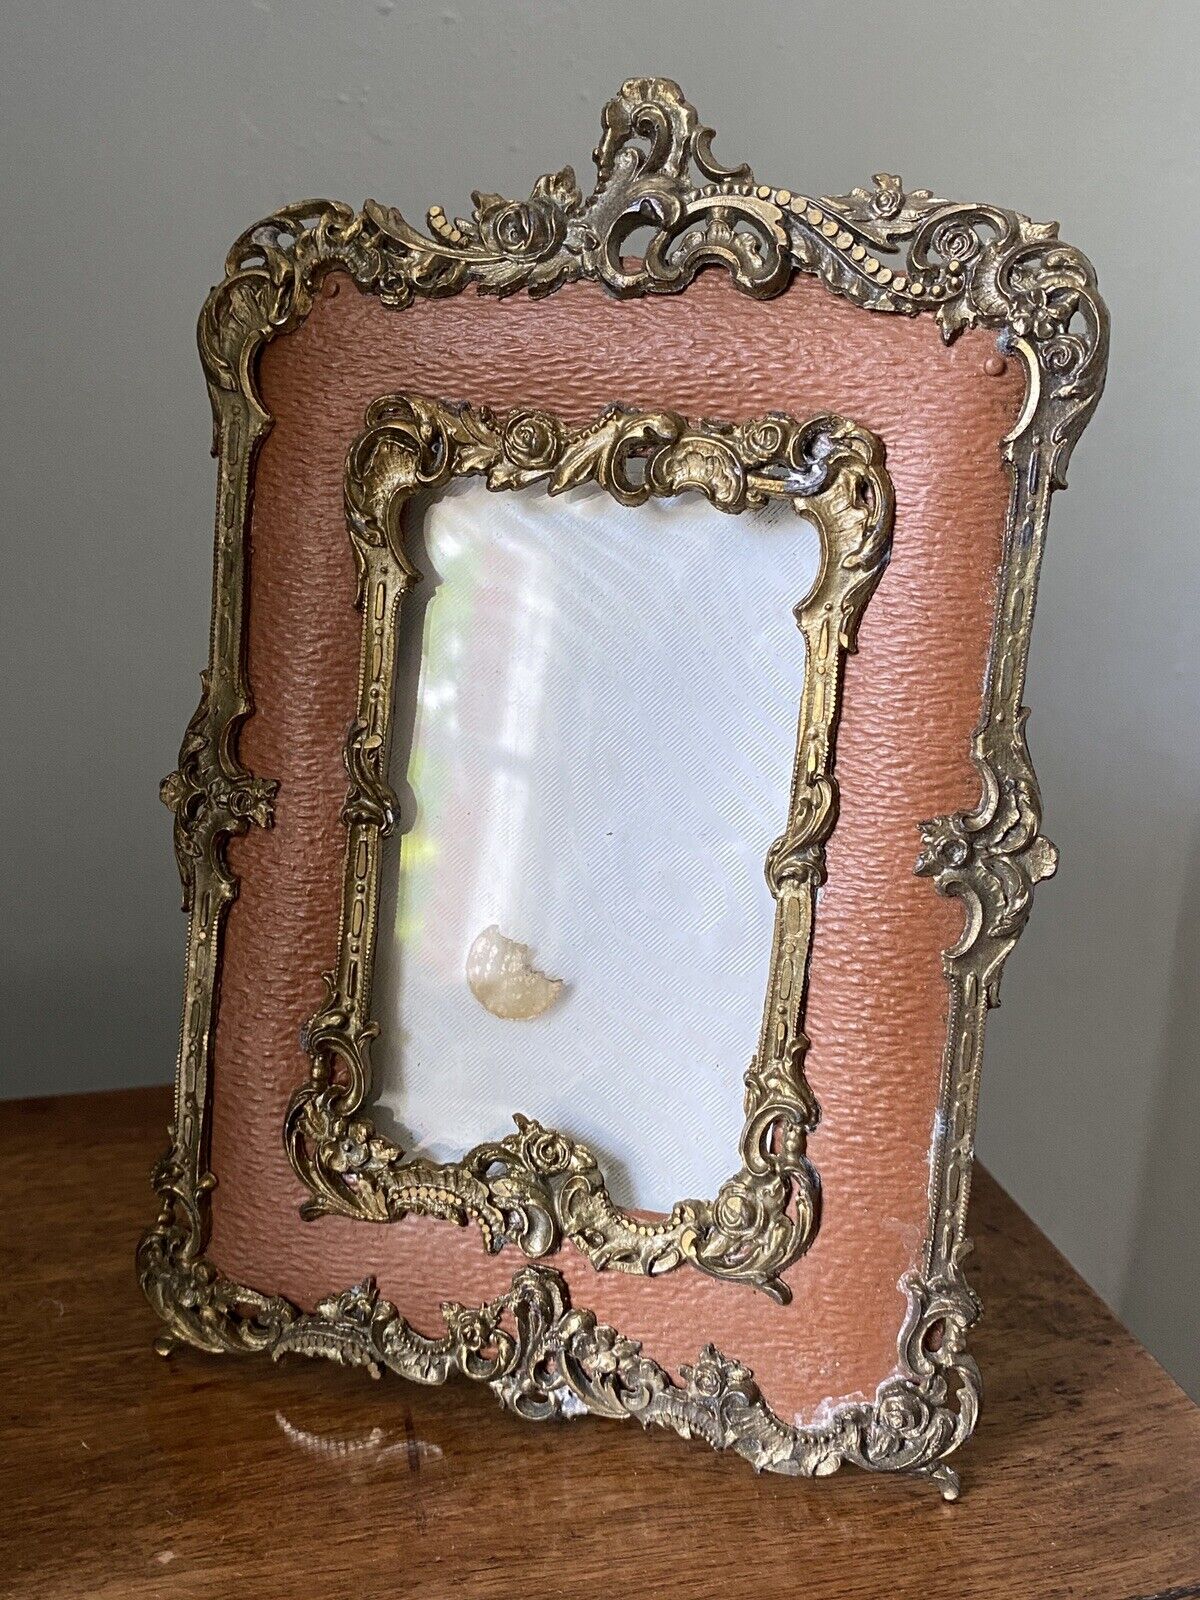 VINTAGE 1950s brown leather effect brass Rococo style photograph frame